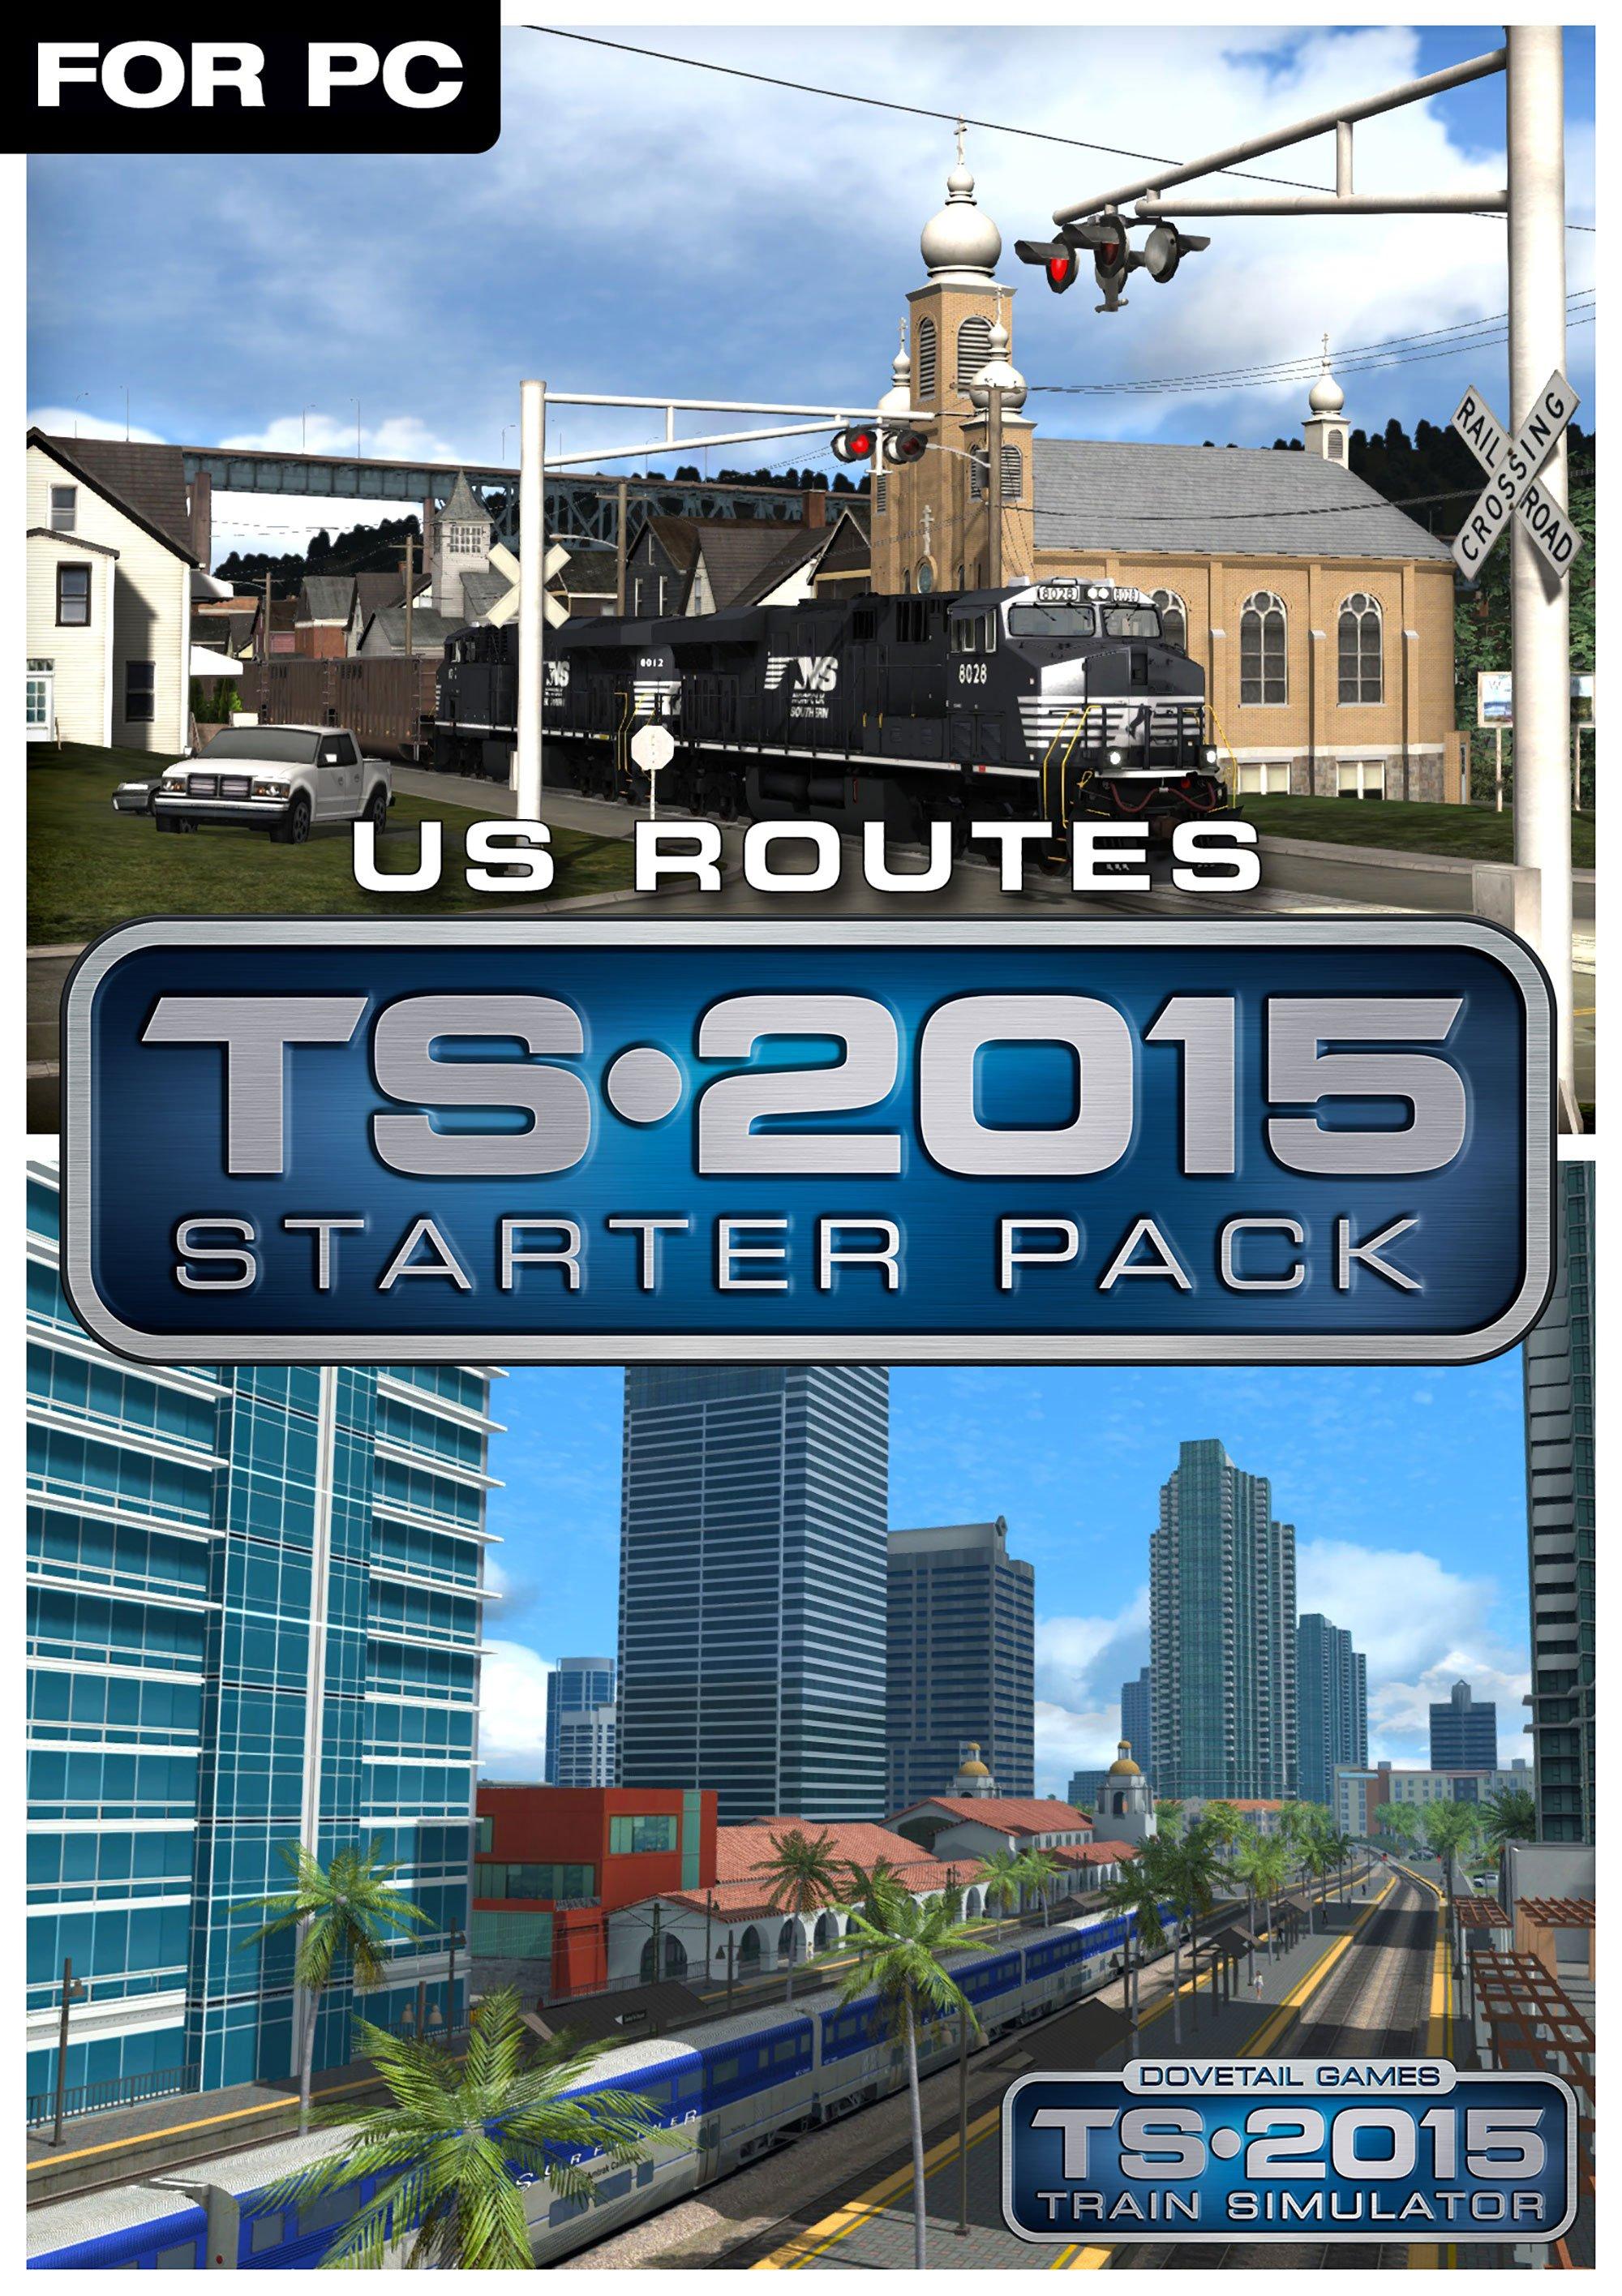 Dovetail Games Train Simulator 2015 - US Routes Starter Pack - PC